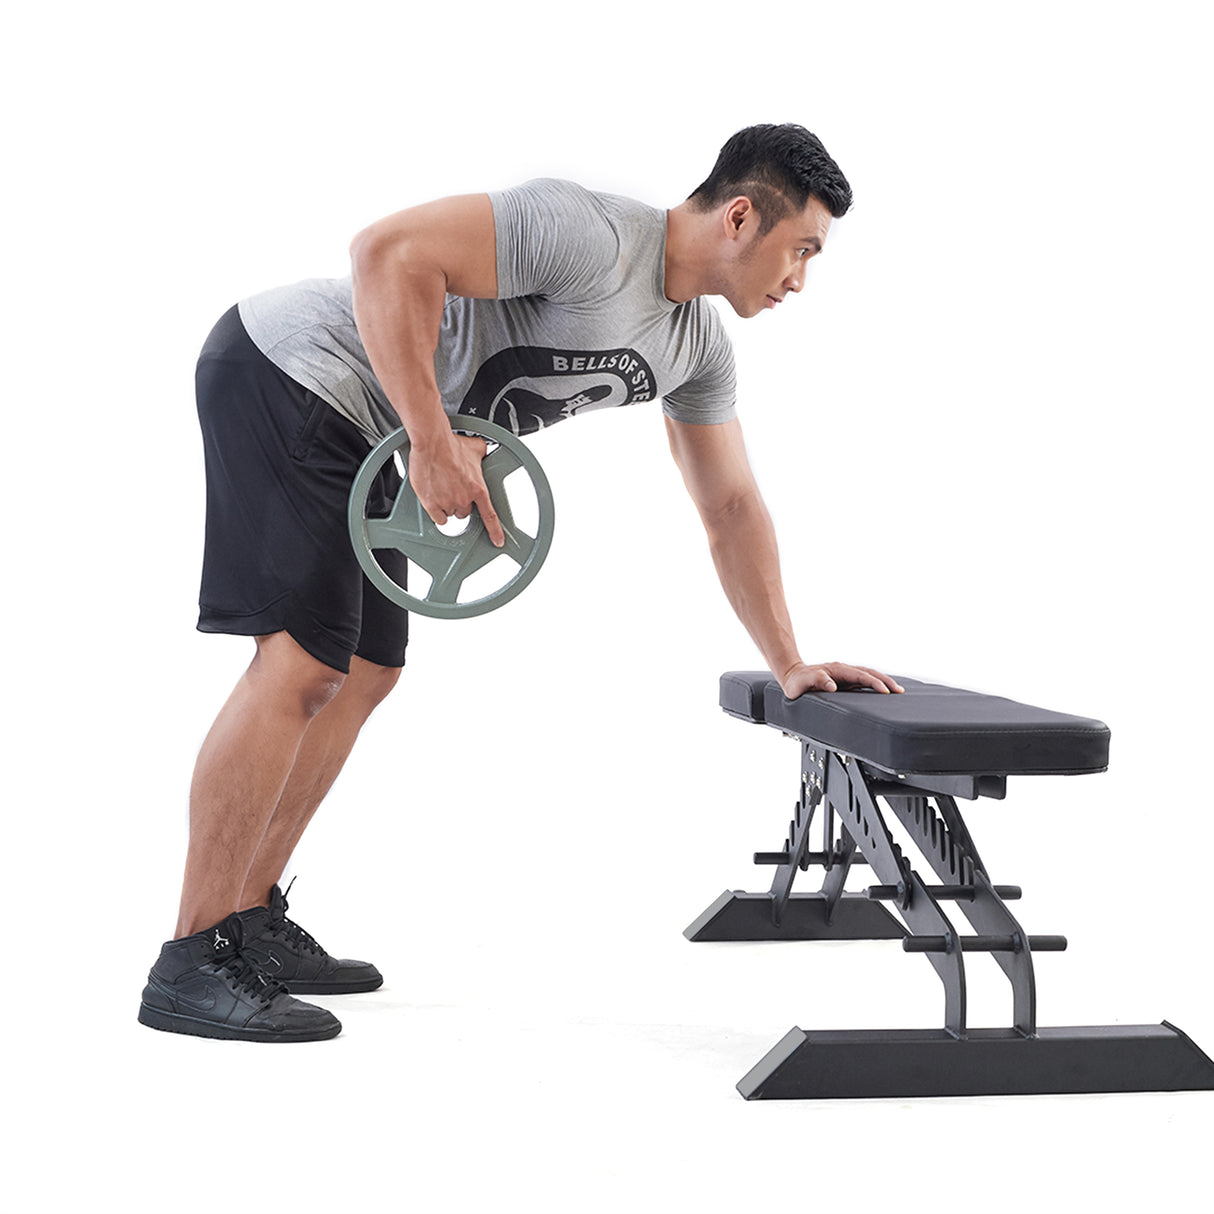 Male athlete doing single arm row with Gray Mighty Grip Olympic Weight Plates